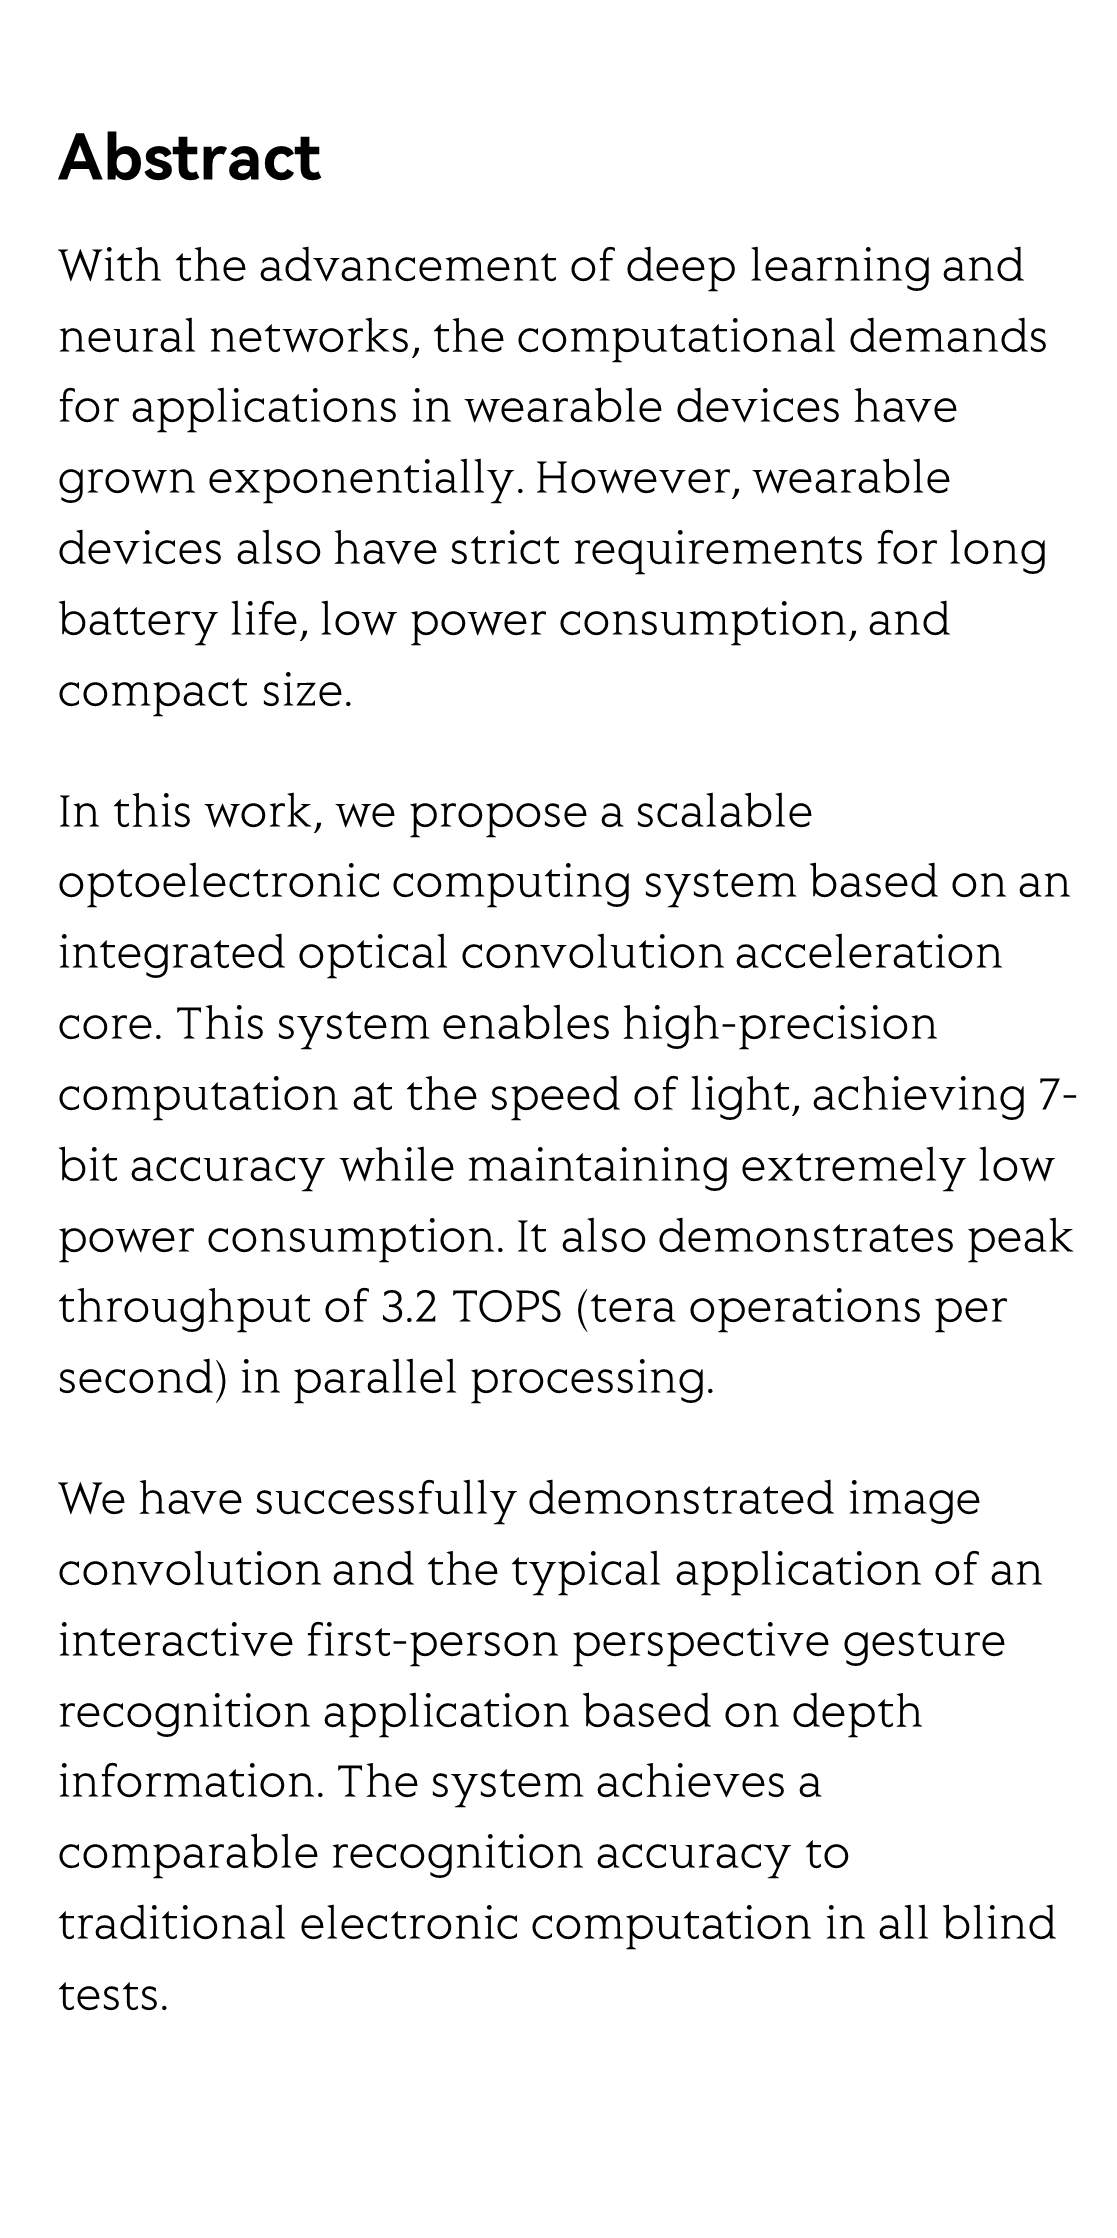 Integrated photonic convolution acceleration core for wearable devices_2